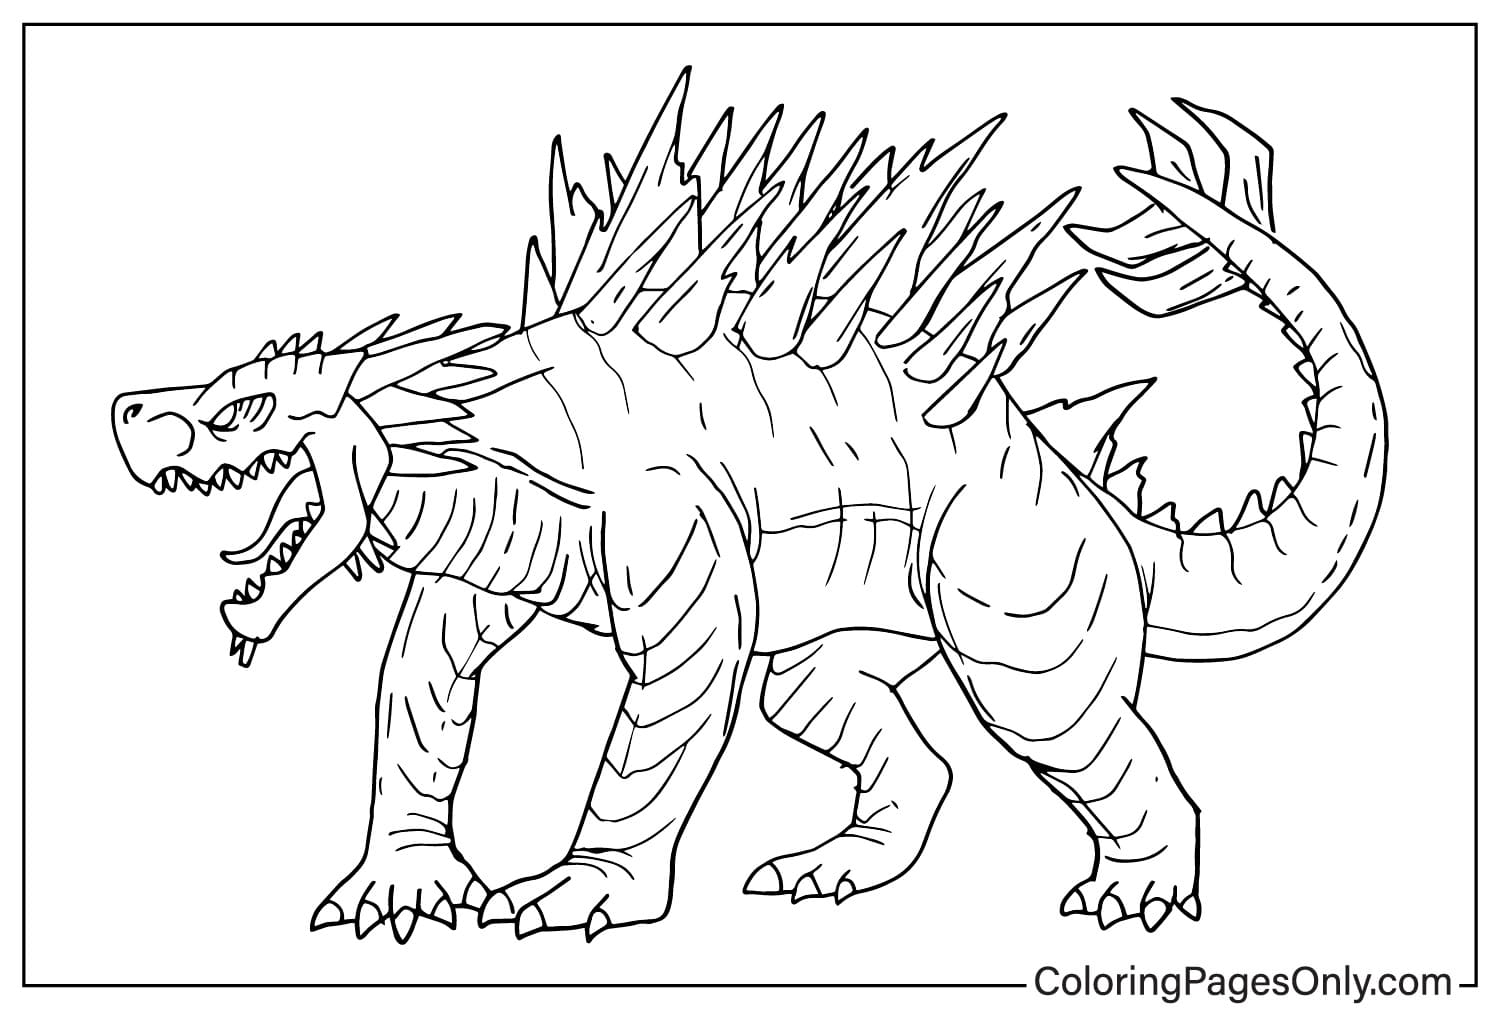 Godzilla Coloring Page for Kids from Godzilla x Kong: The New Empire